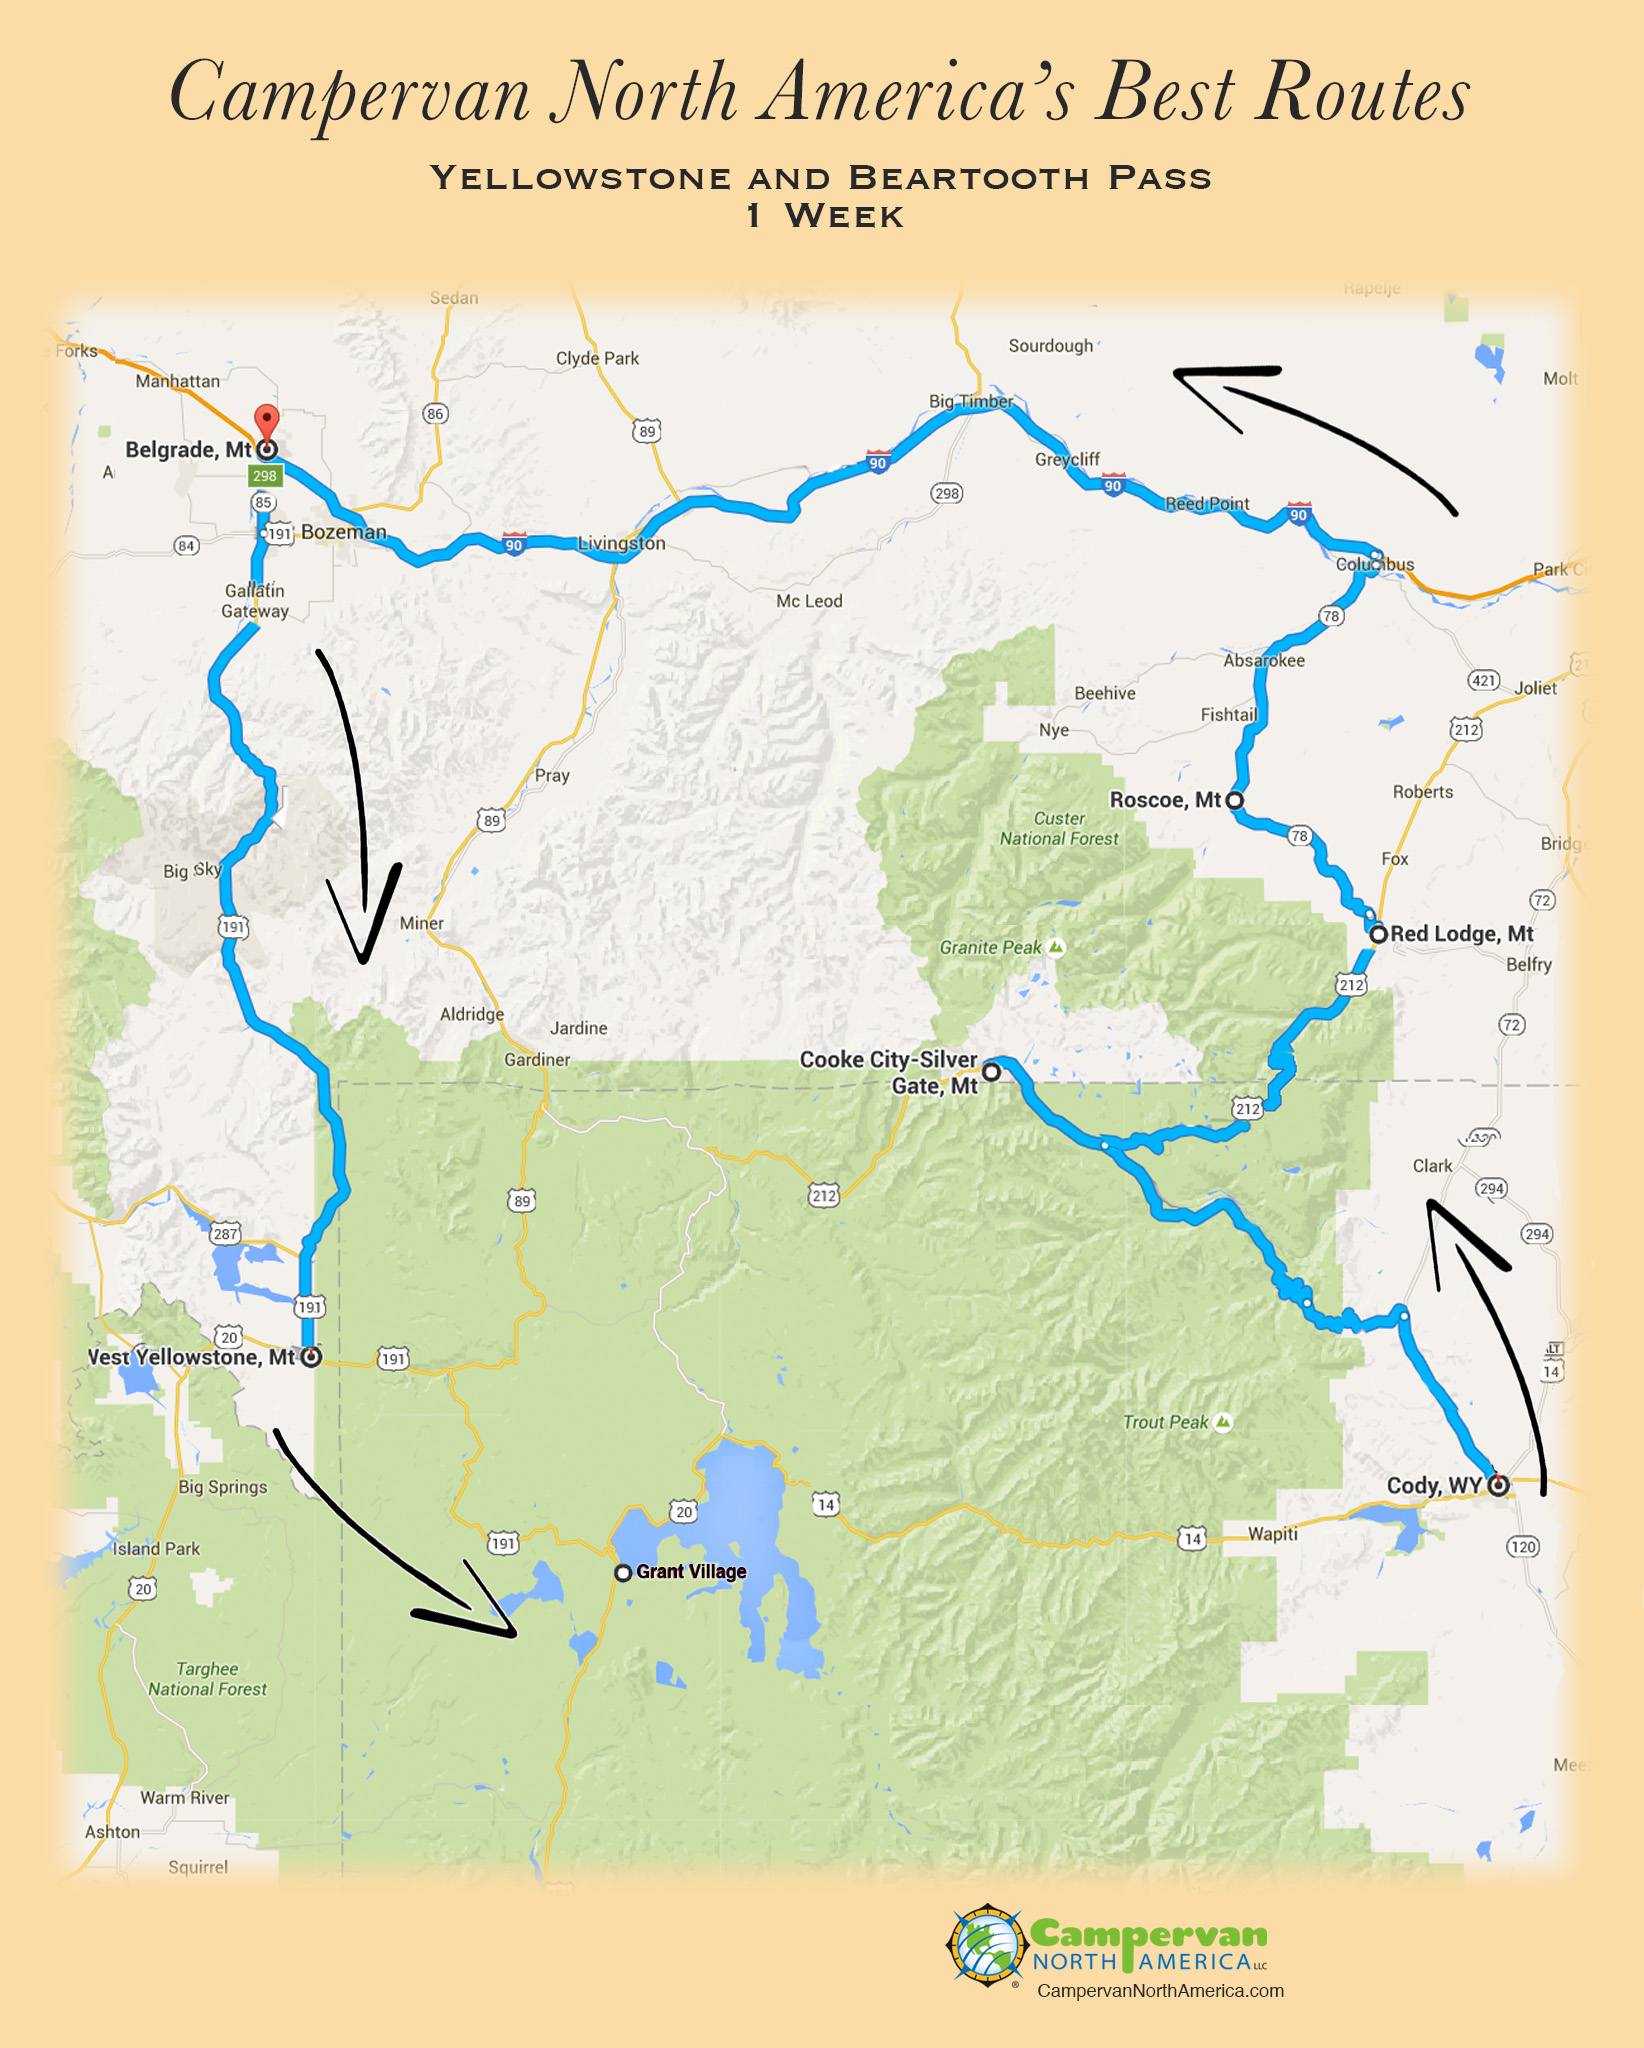 Campervan Tour: Yellowstone and Beartooth Pass map.